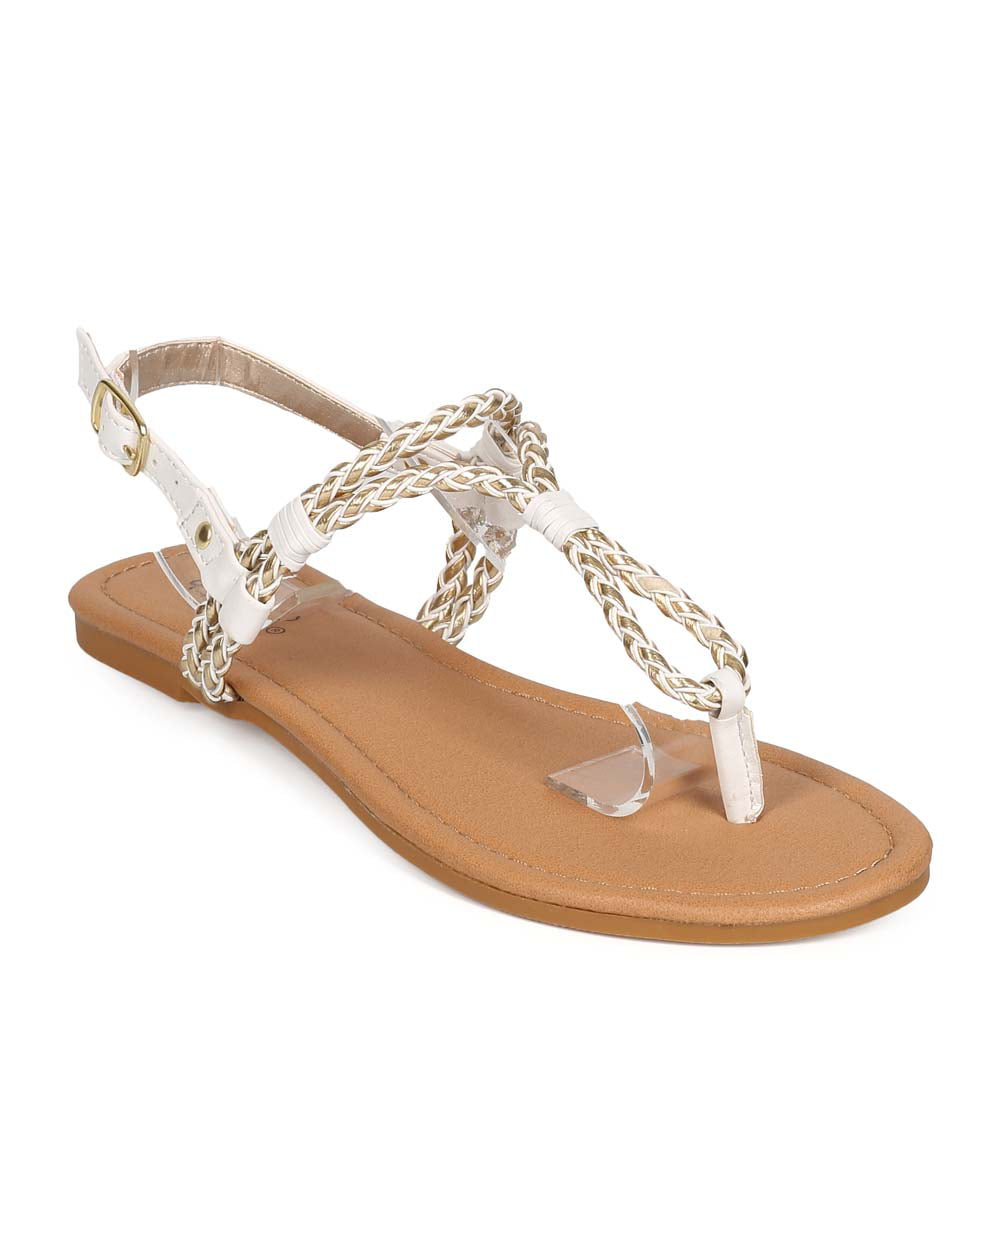 New Women Qupid Archer-143 Leatherette Woven Slingback T-Strap Thong ...